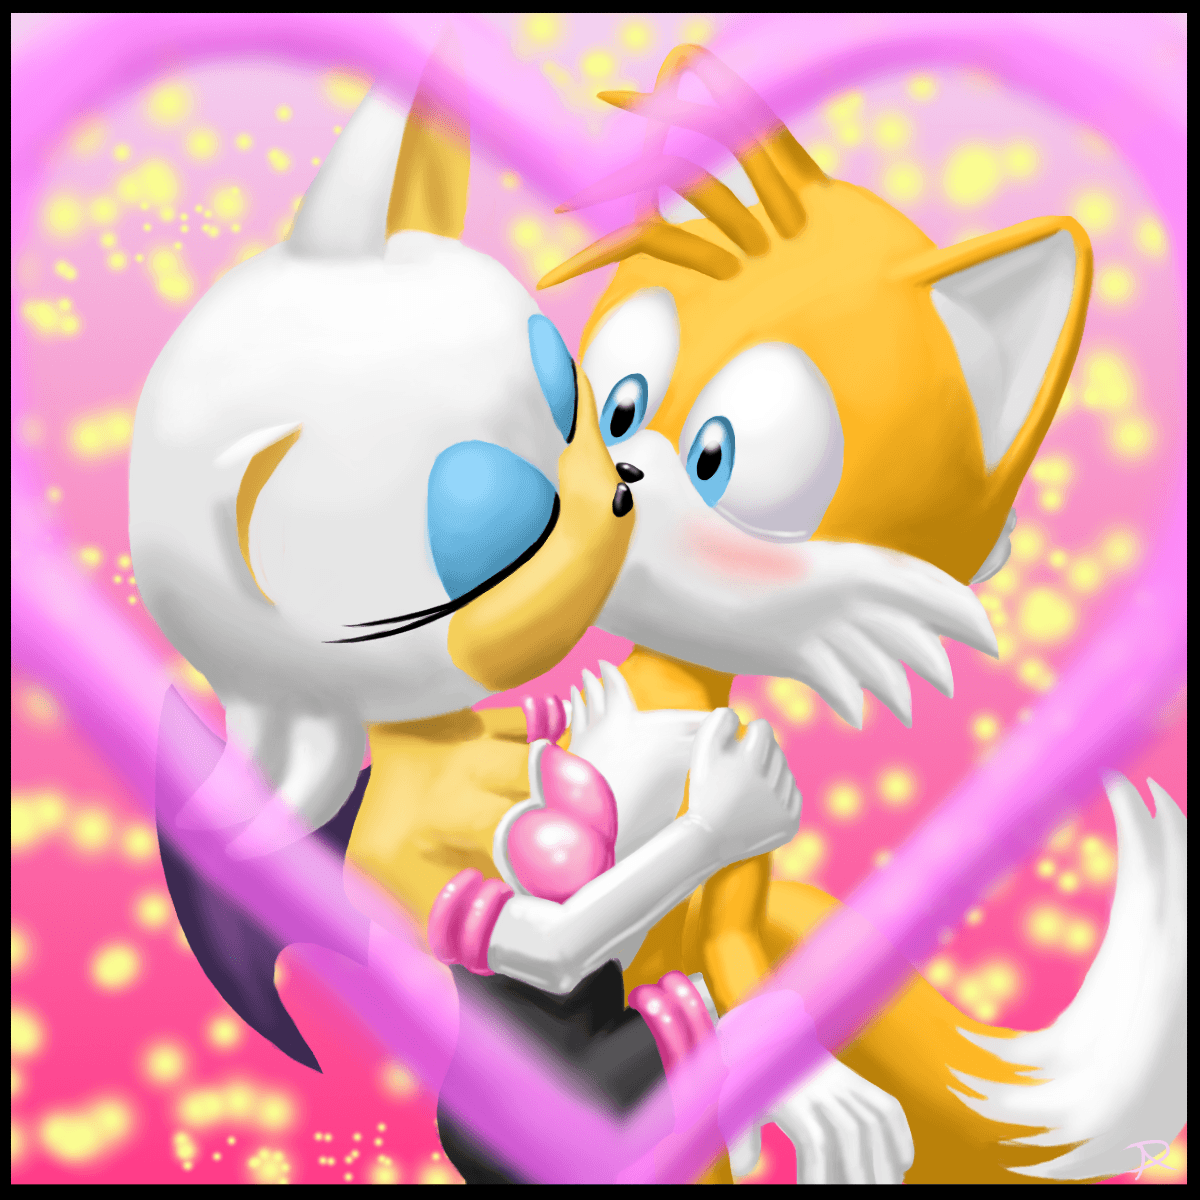 Rouge X Tails. Sonic the Hedgehog